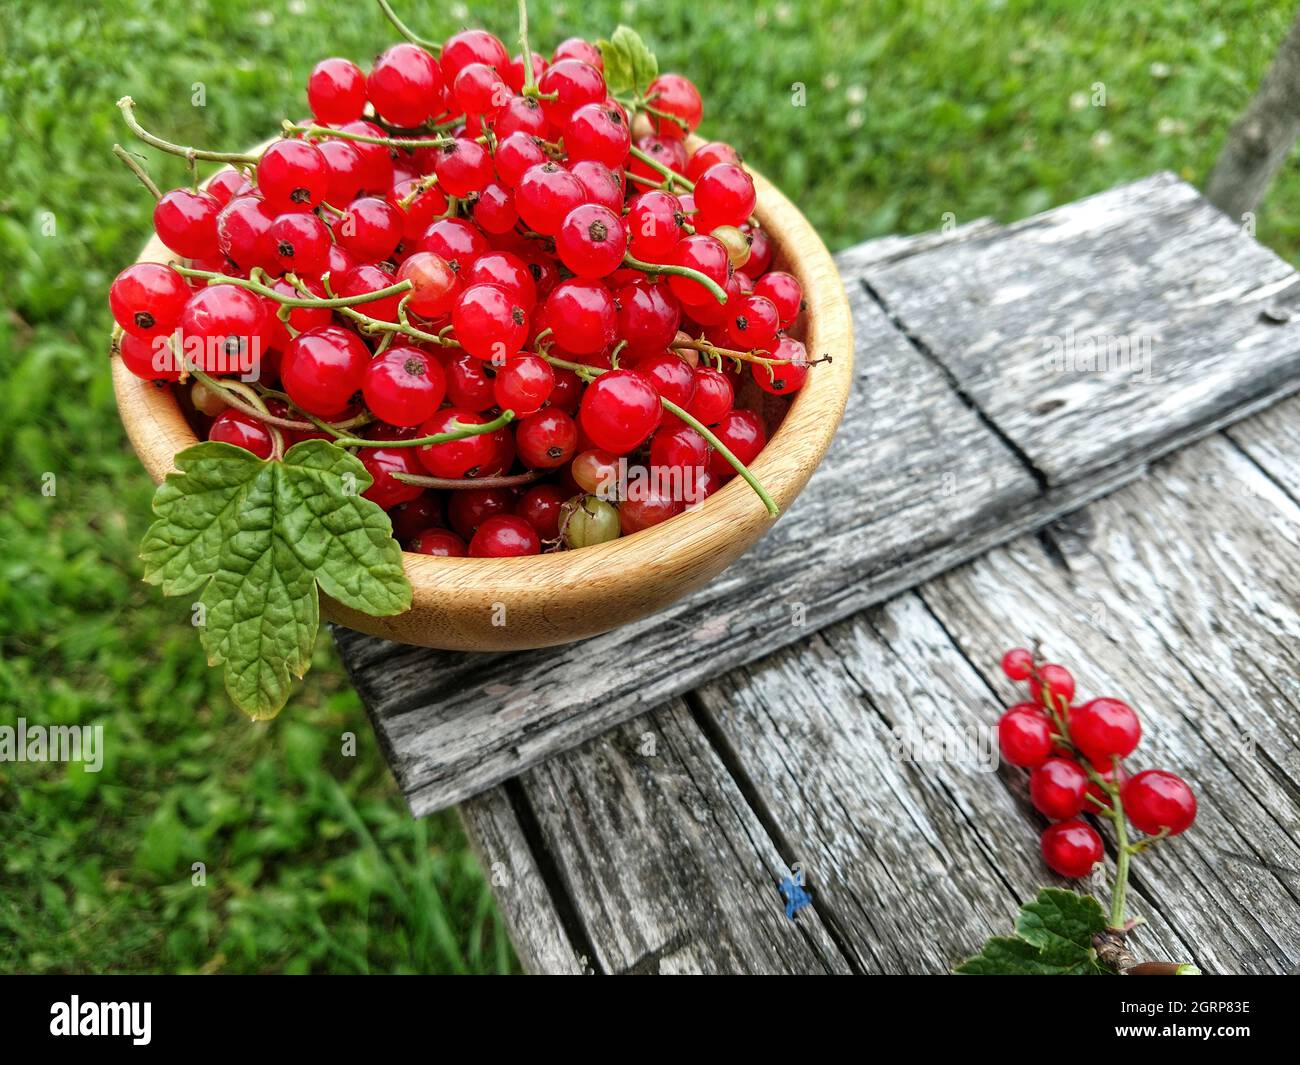 High Angle View Of Red Currants In Bowl On Crate Stock Photo